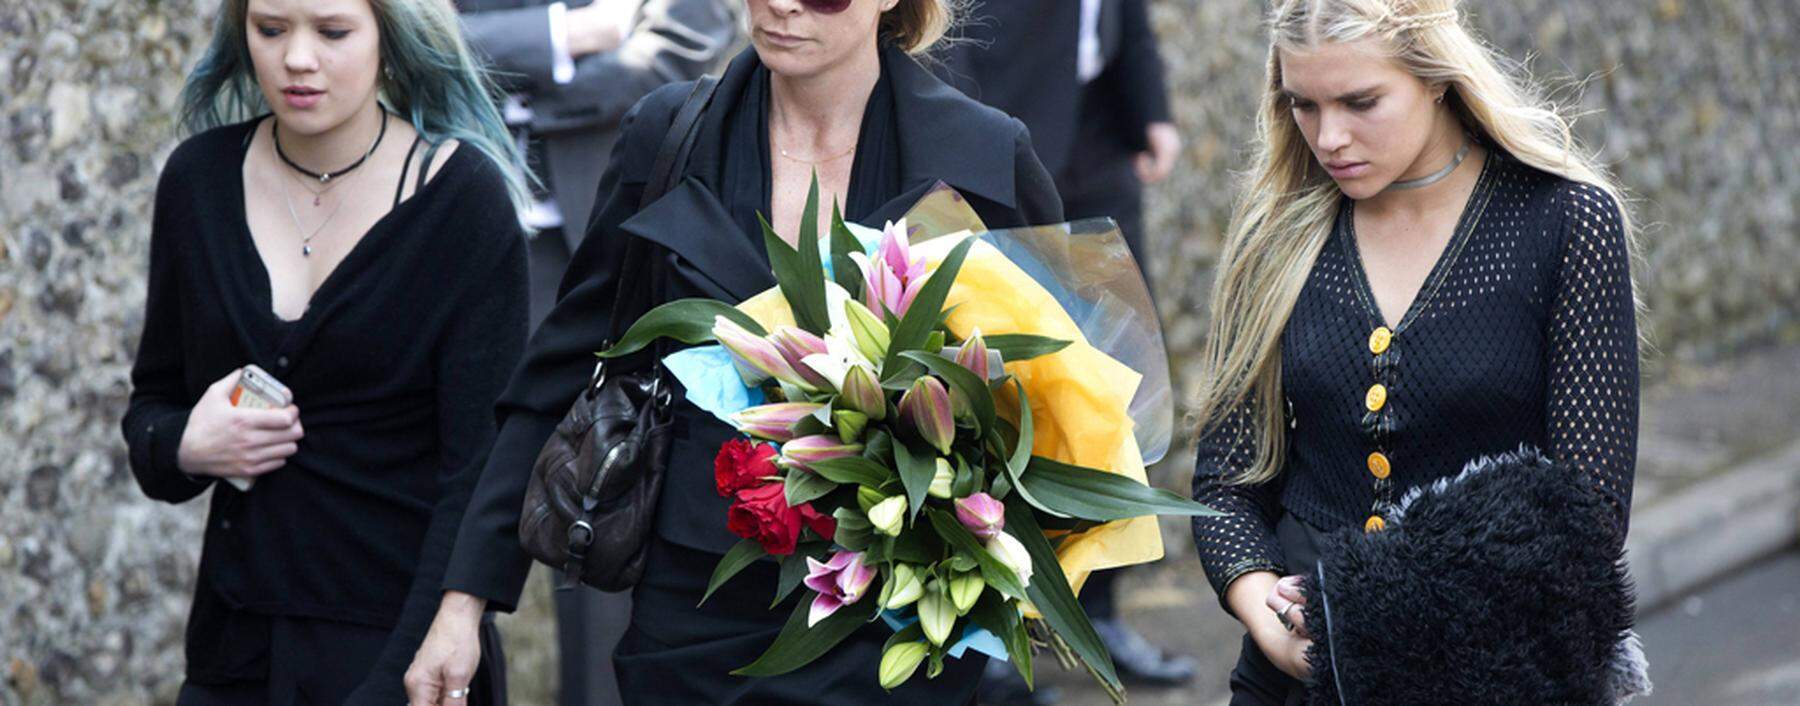 Deborah Leng arrives at the funeral service for Peaches Geldof at the St Mary Magdalene and St Lawrence church in Davington